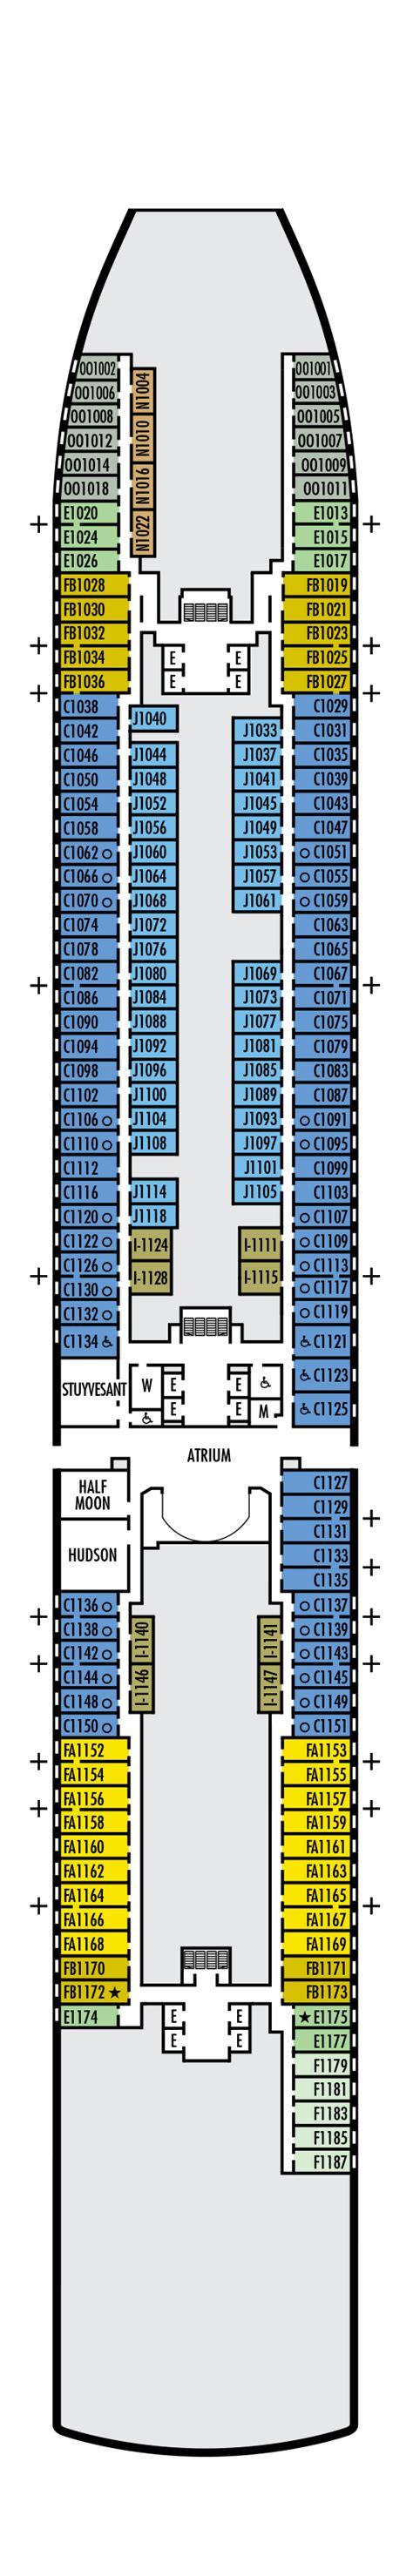 Statendam deck plan  The boat has 11 passenger decks (7 with cabins), 13 lounges and bars, 3 swimming pools (one with retractable glass roof), 5 outdoor